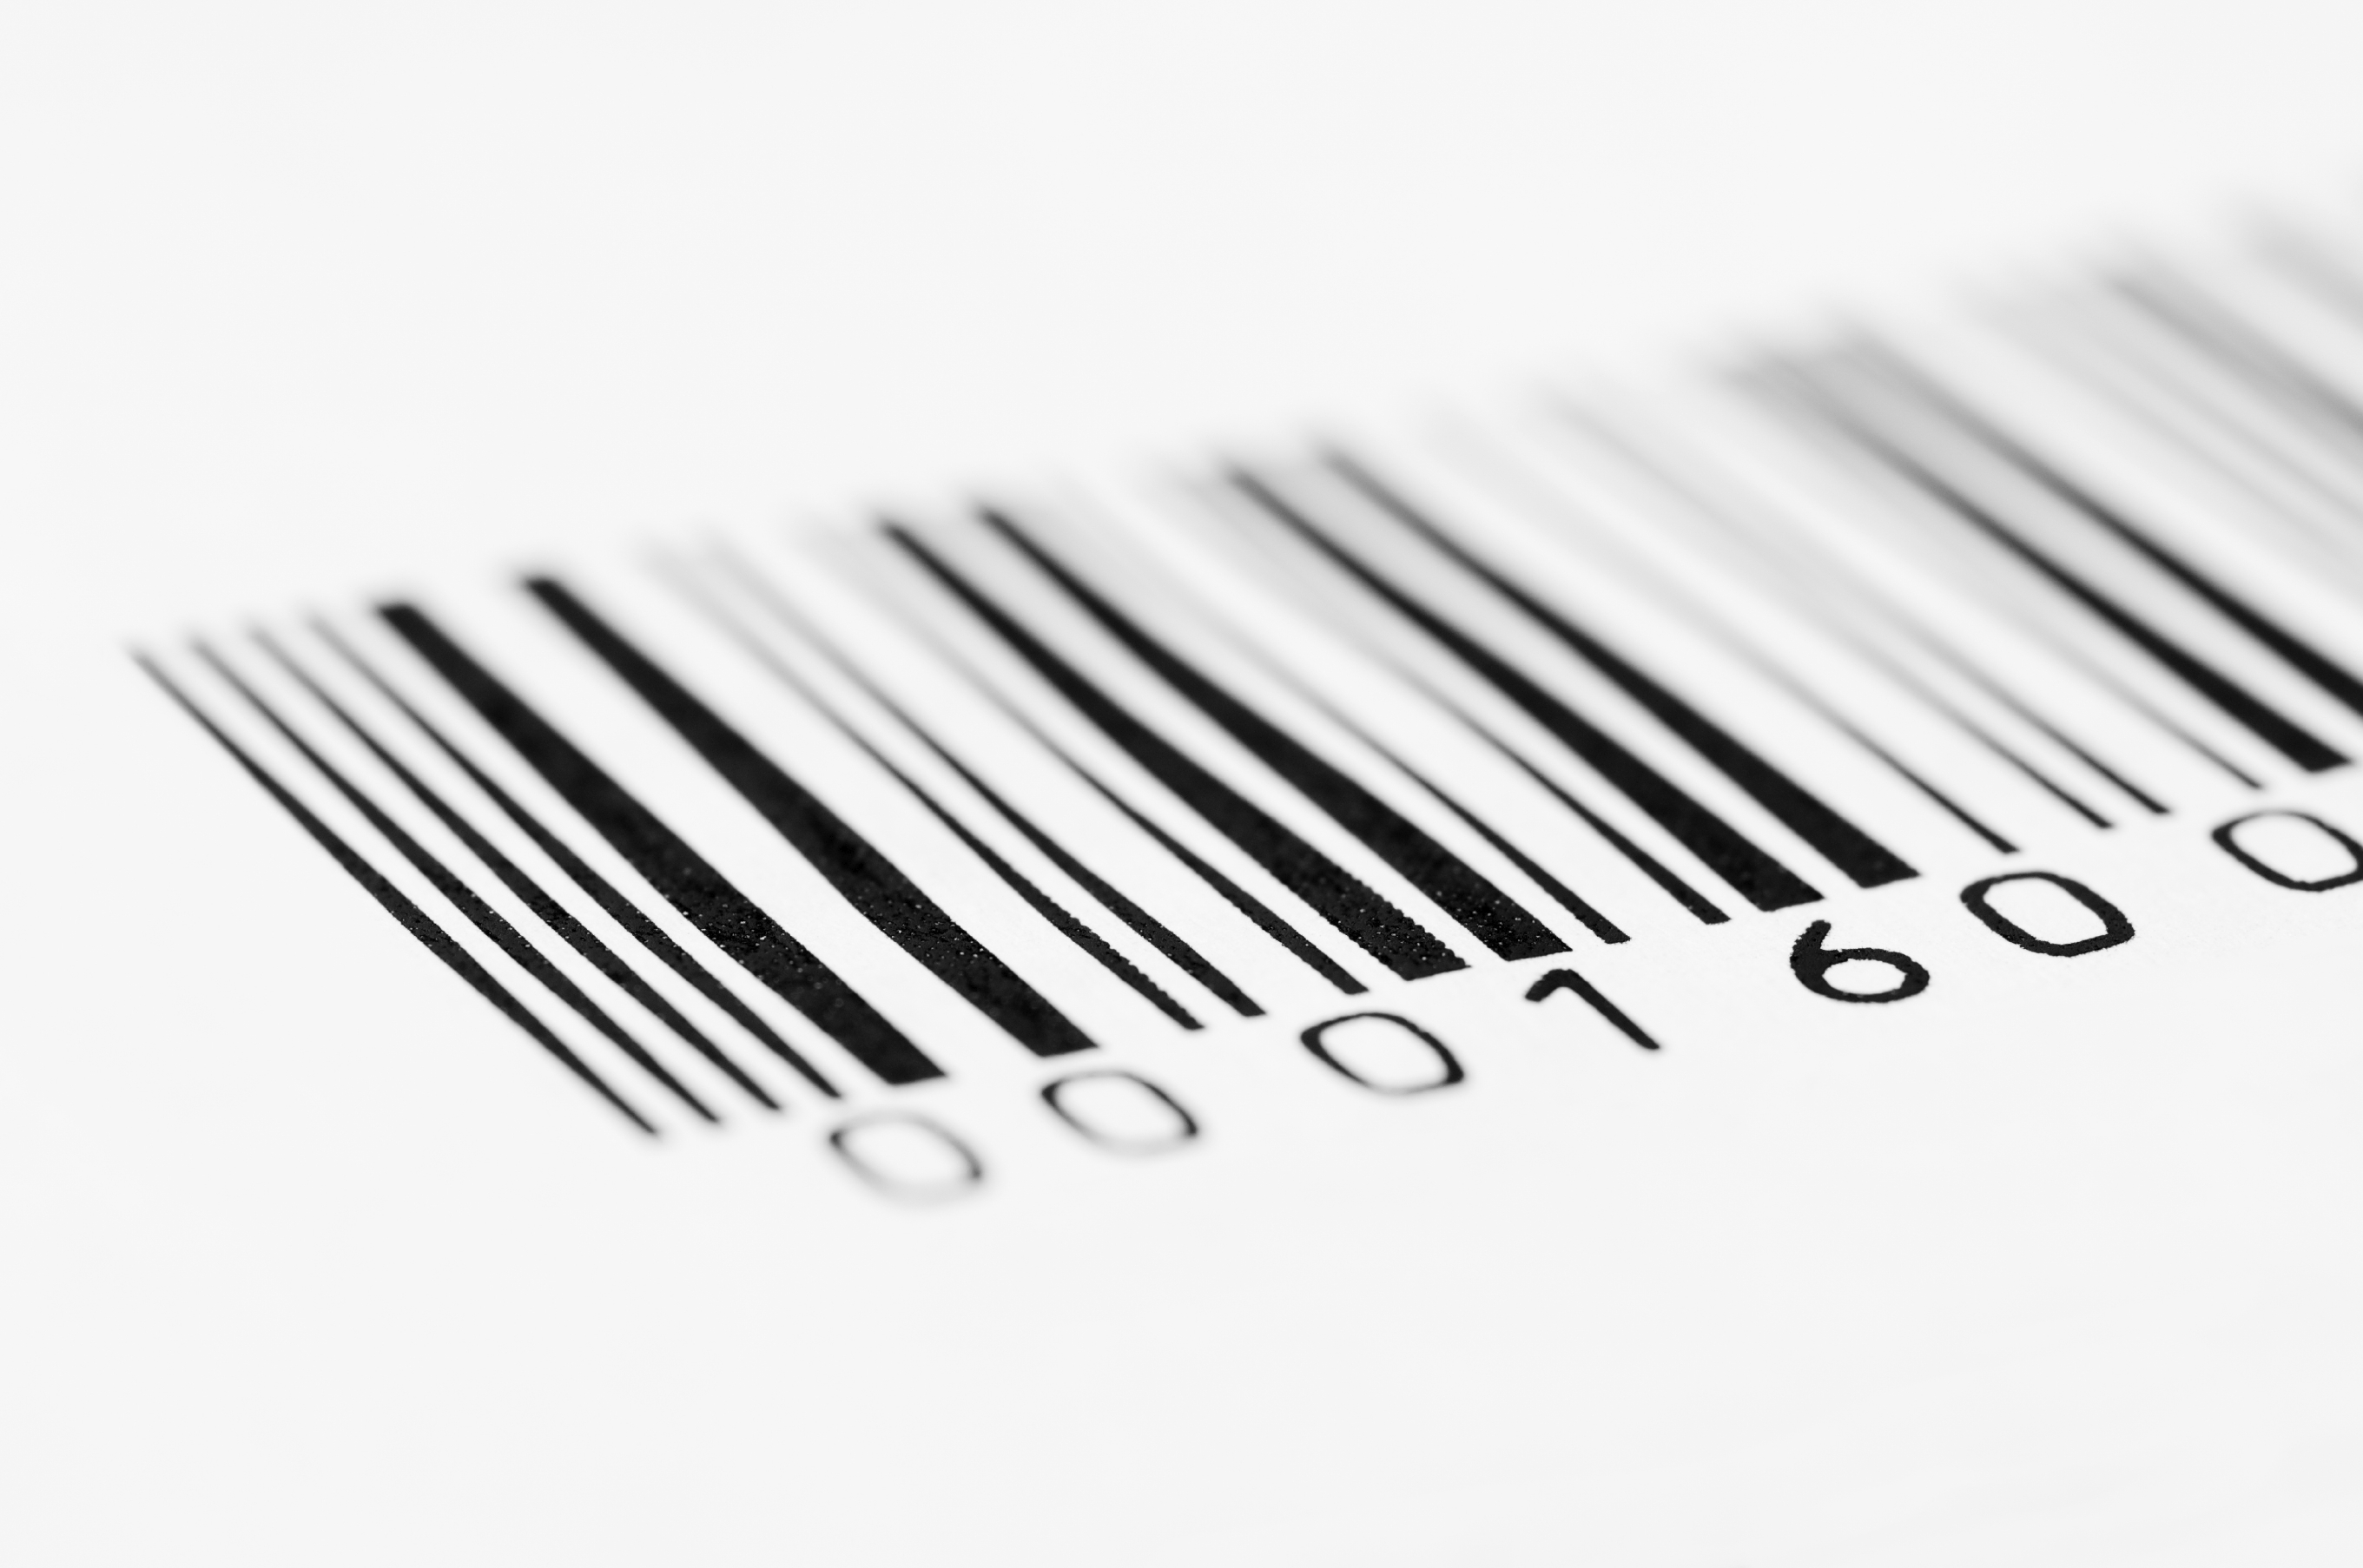 It starts with identification - BARCODE Istock 13569964Large